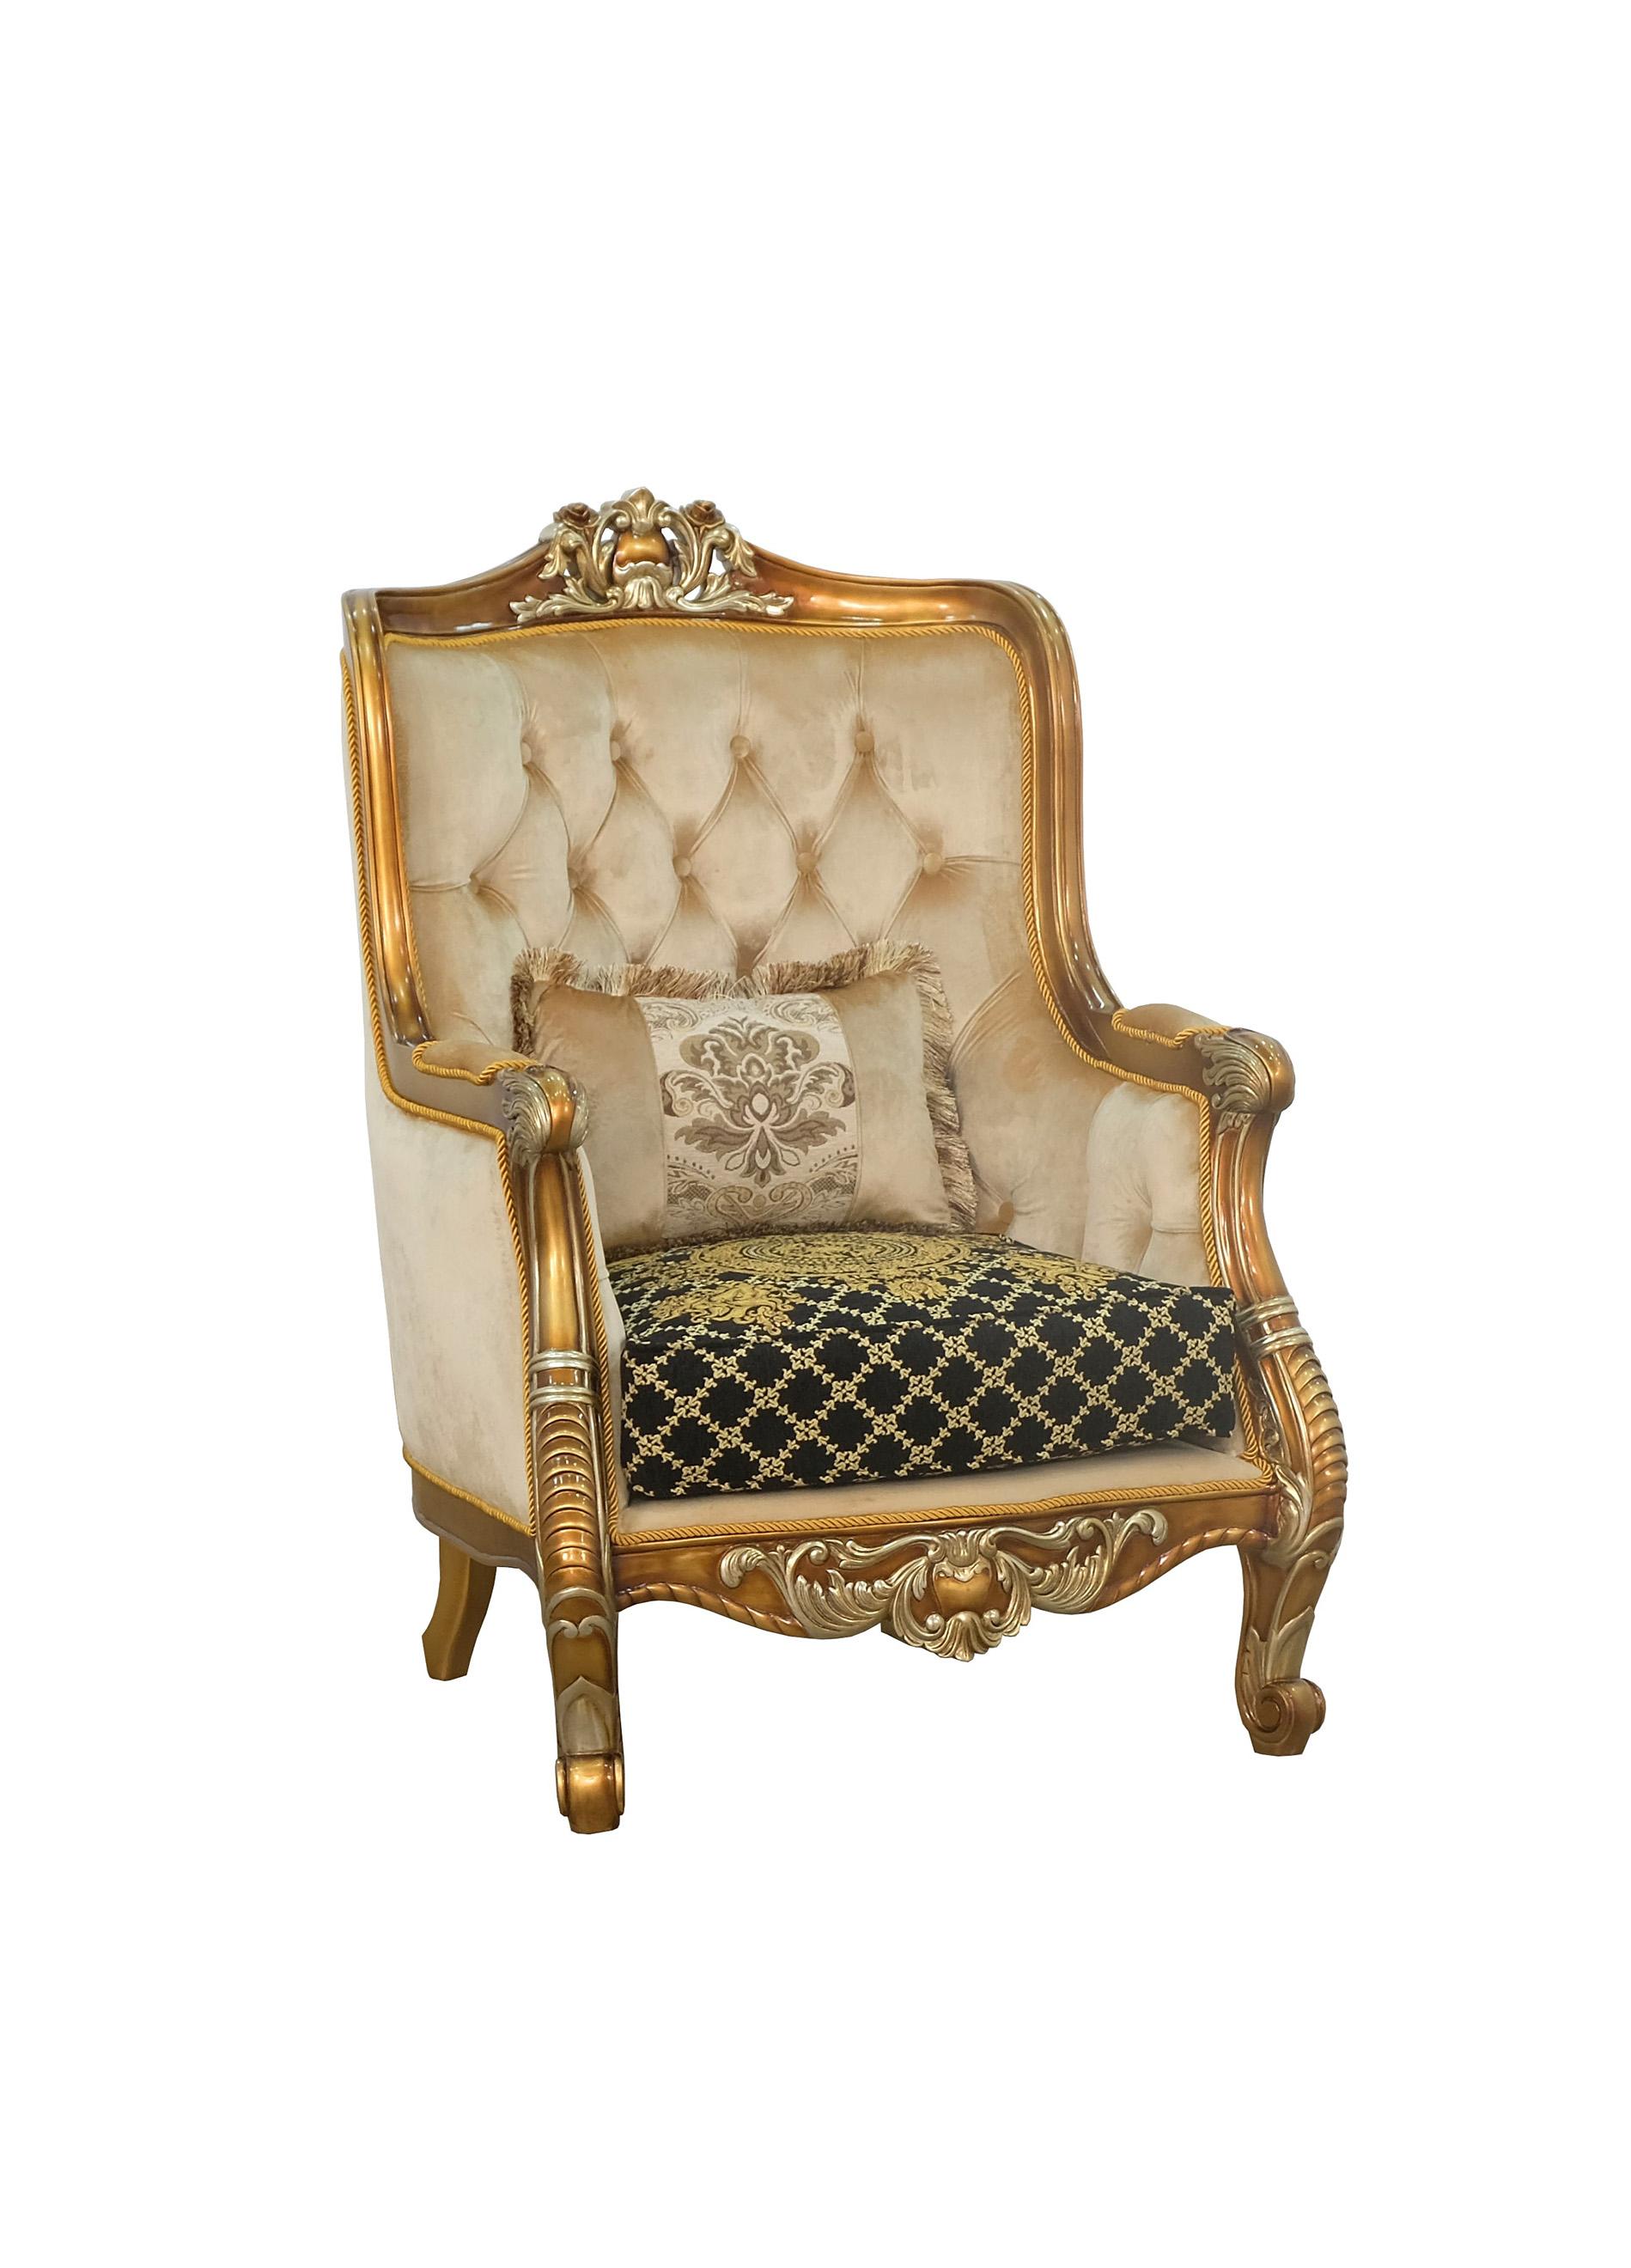 Classic, Traditional Arm Chair LUXOR II 68586-C in Antique, Silver, Gold, Black Fabric